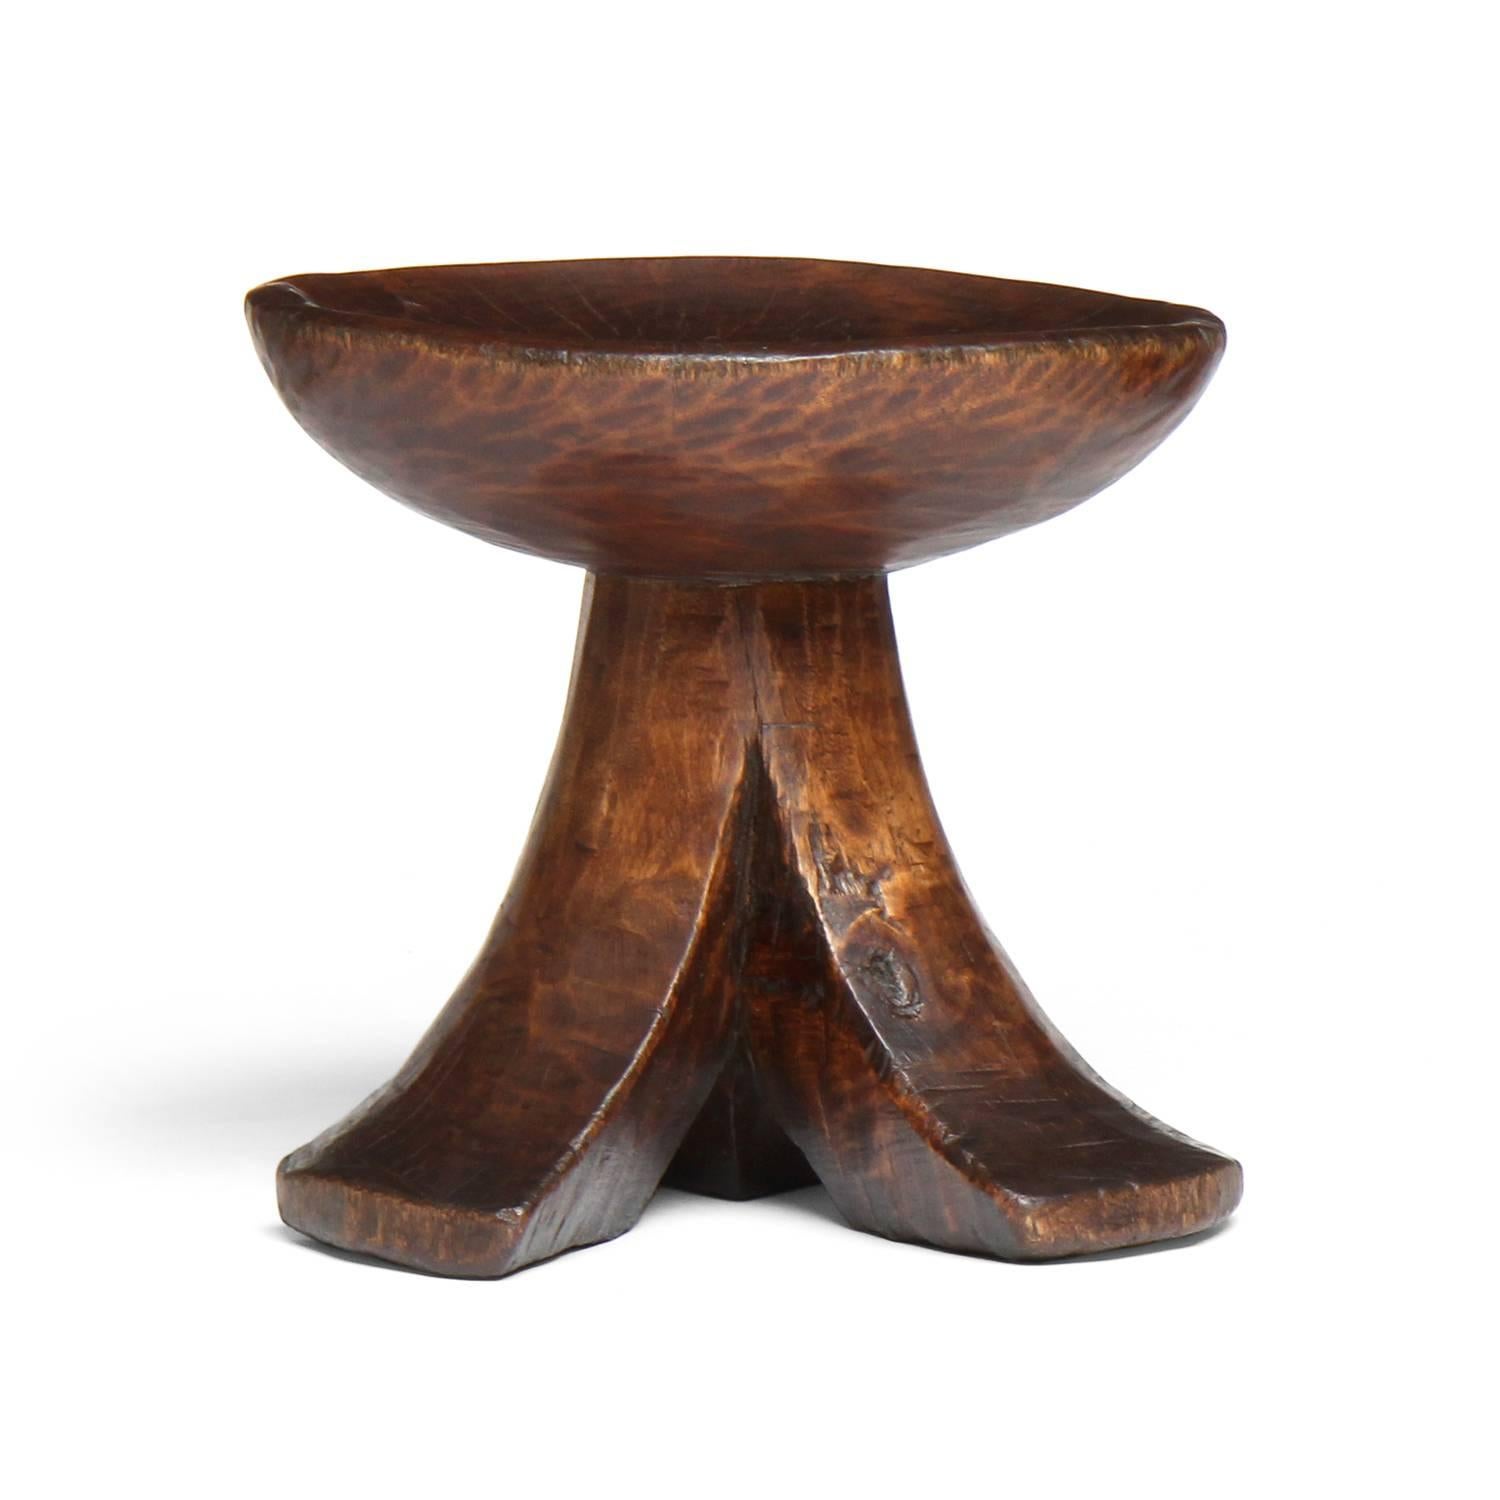 A finely carved and beautifully proportioned tribal stool.